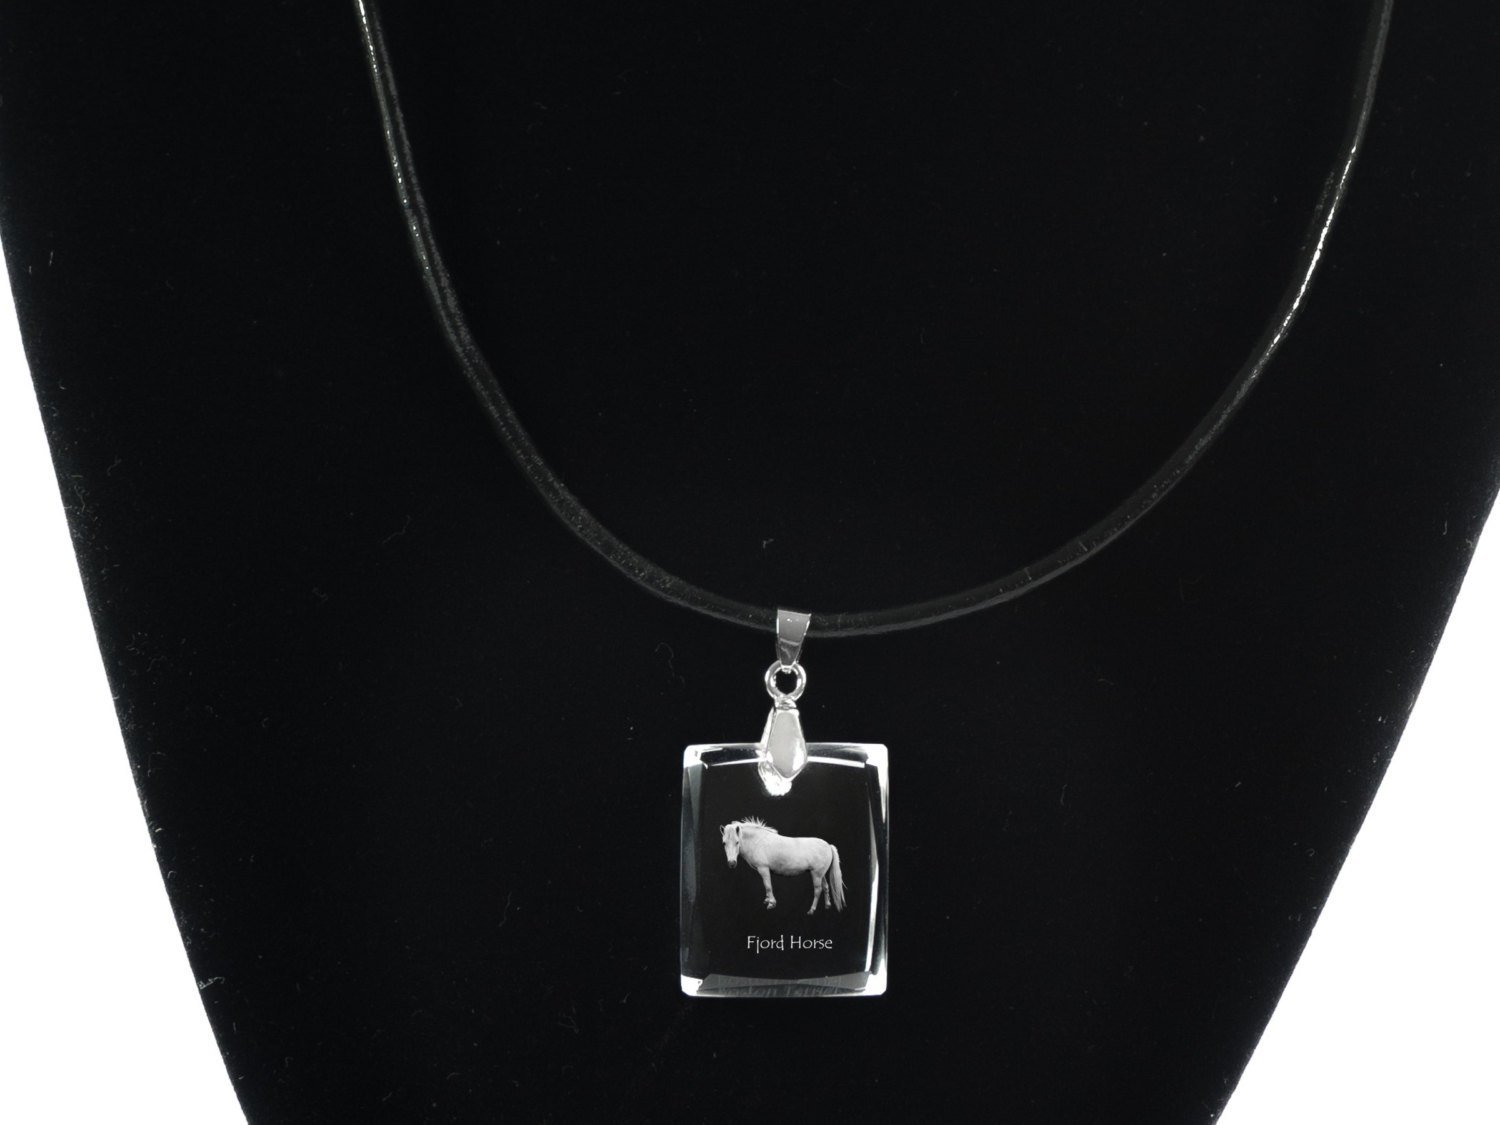 Primary image for Norwegisches Fjordpferd ,  Horse Crystal Necklace, Pendant, High Quality